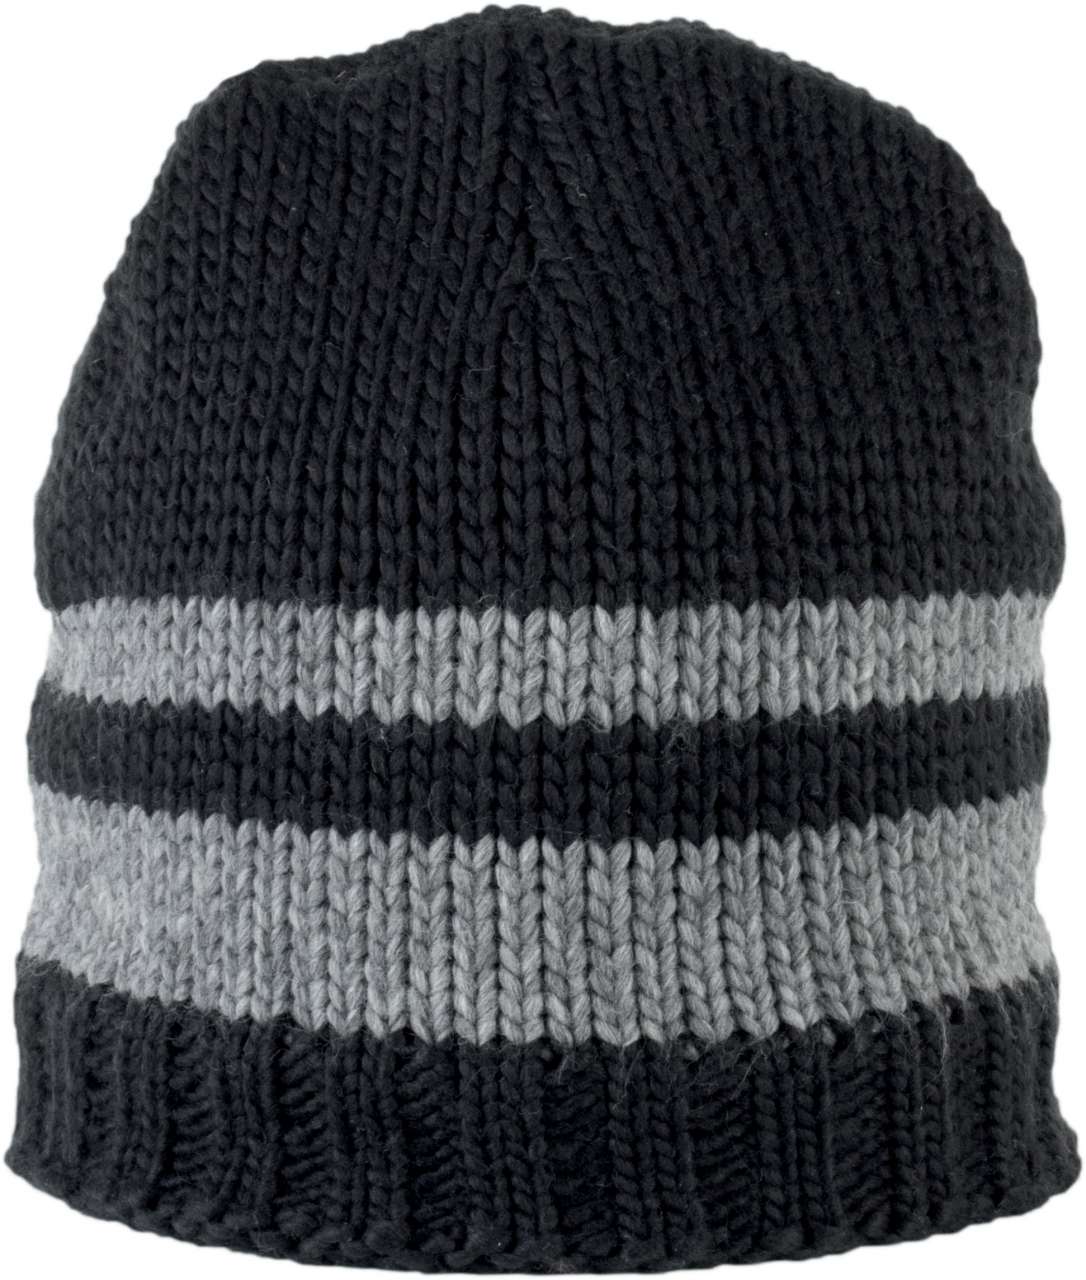 FLEECE LINED KNITTED BEANIE